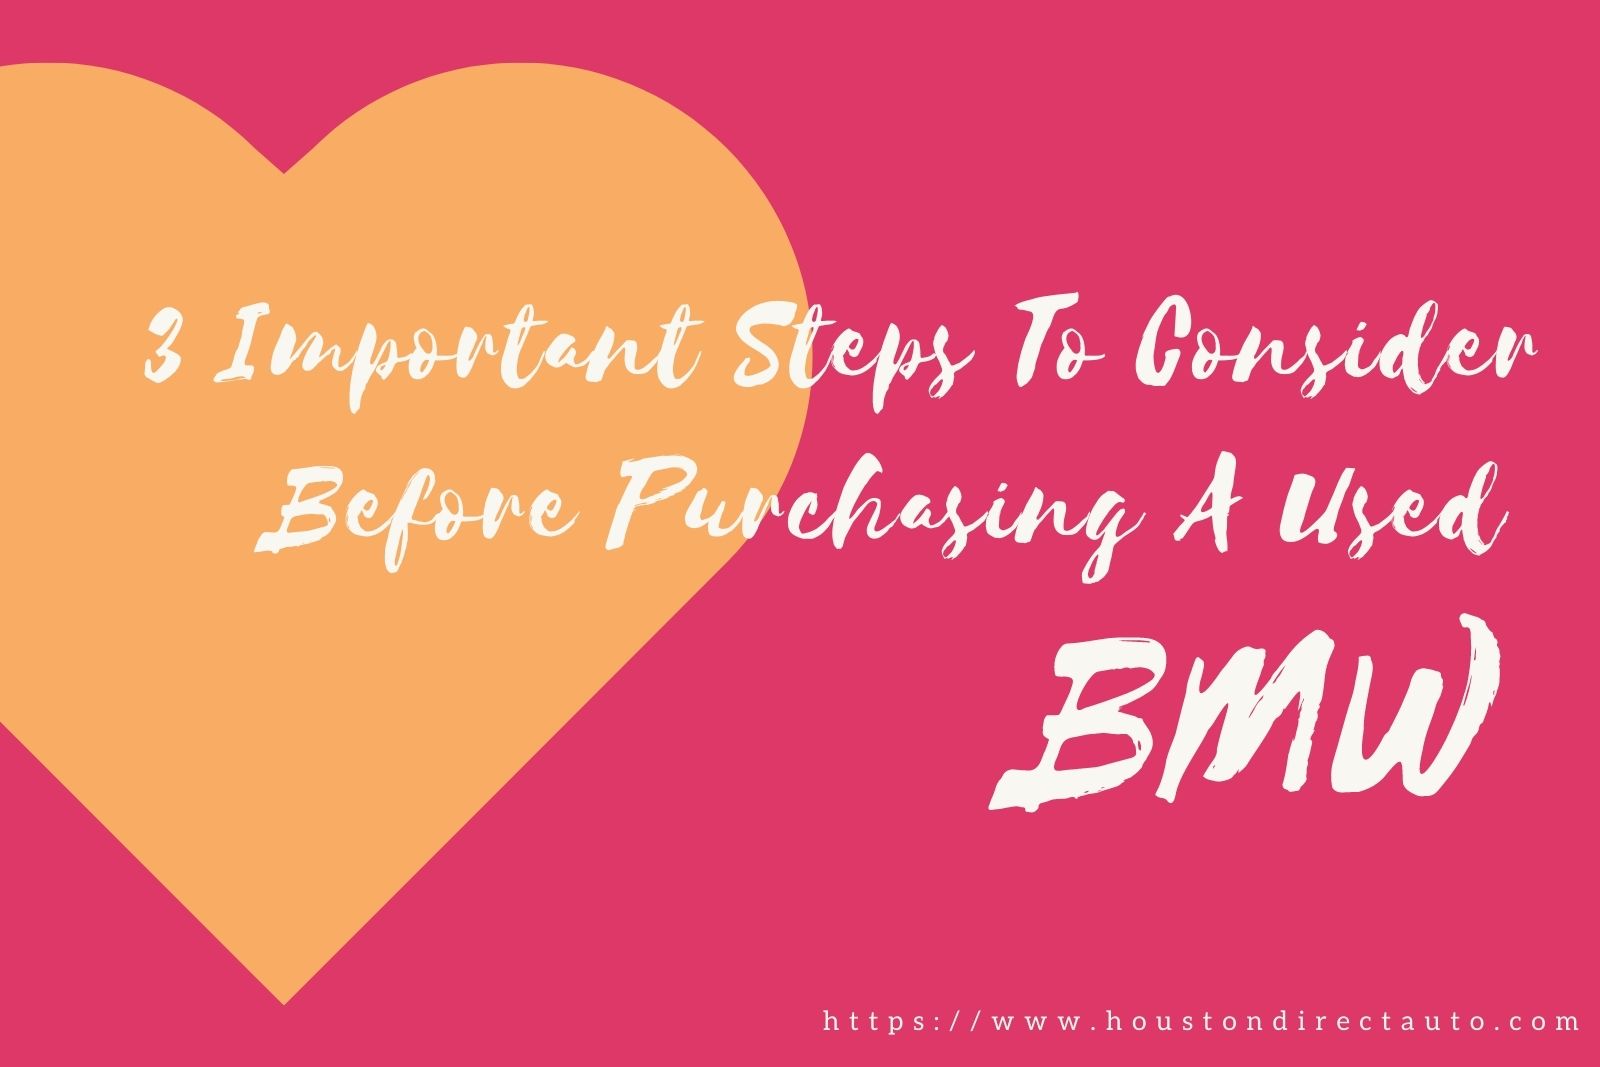 3 Important Steps To Consider Before Purchasing A Used BMW